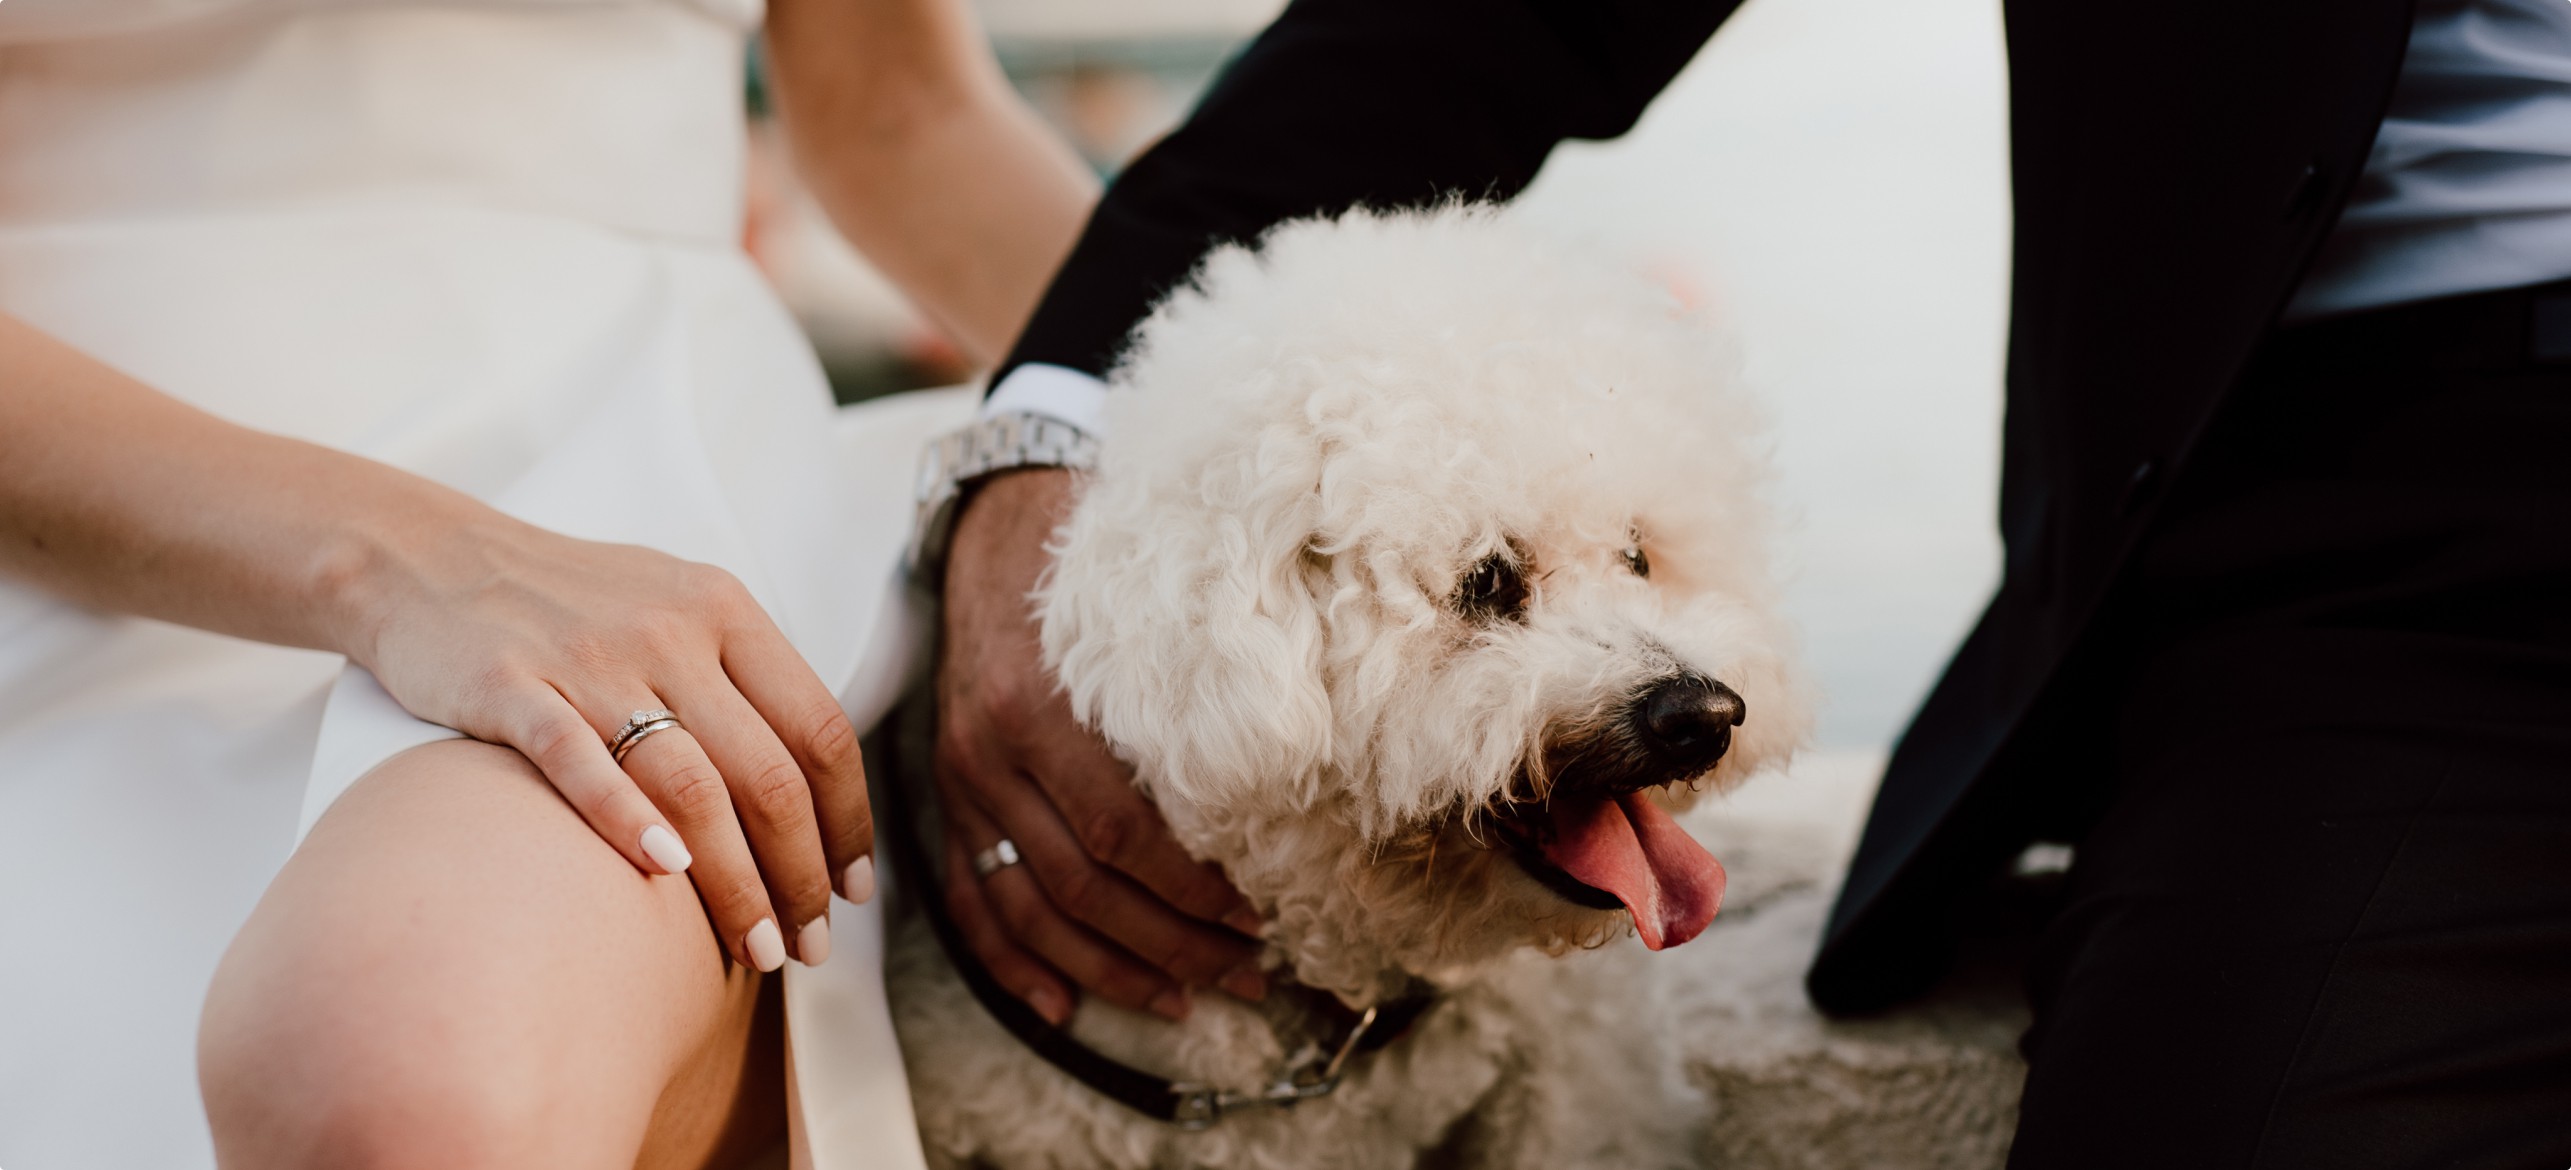 A couple on their wedding day petting a dog